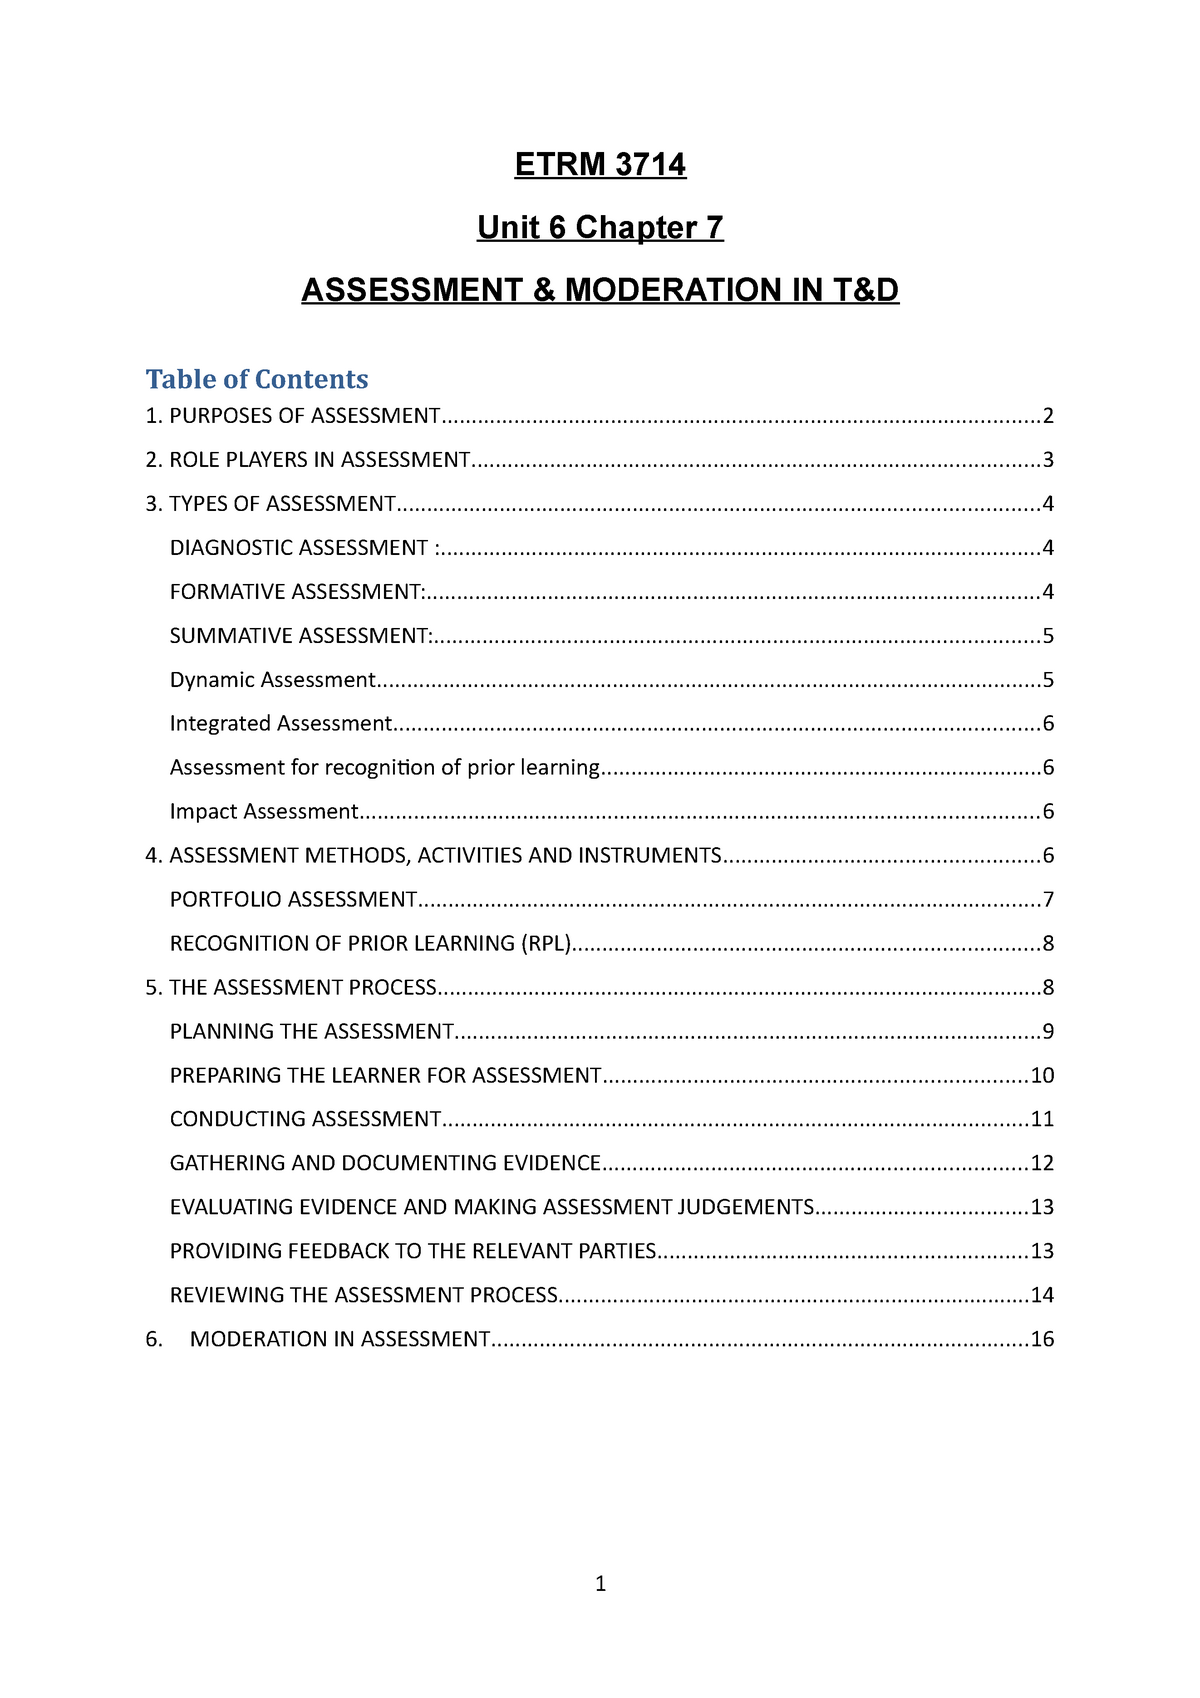 chapt-7-assessment-moderation-in-t-d-assessment-moderation-in-t